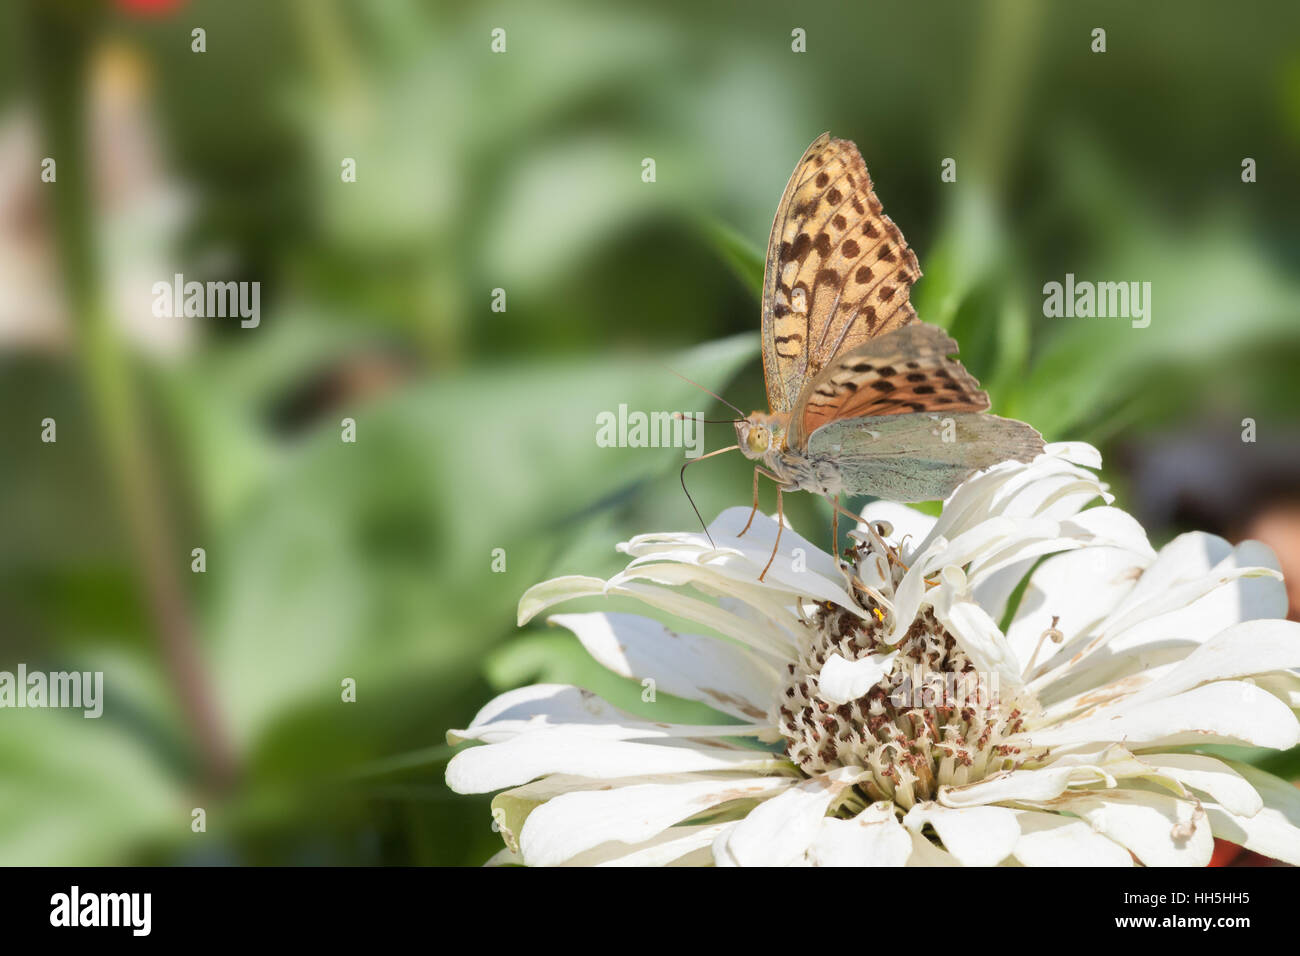 Closeup butterfly on flower in the bright summer afternoon Stock Photo